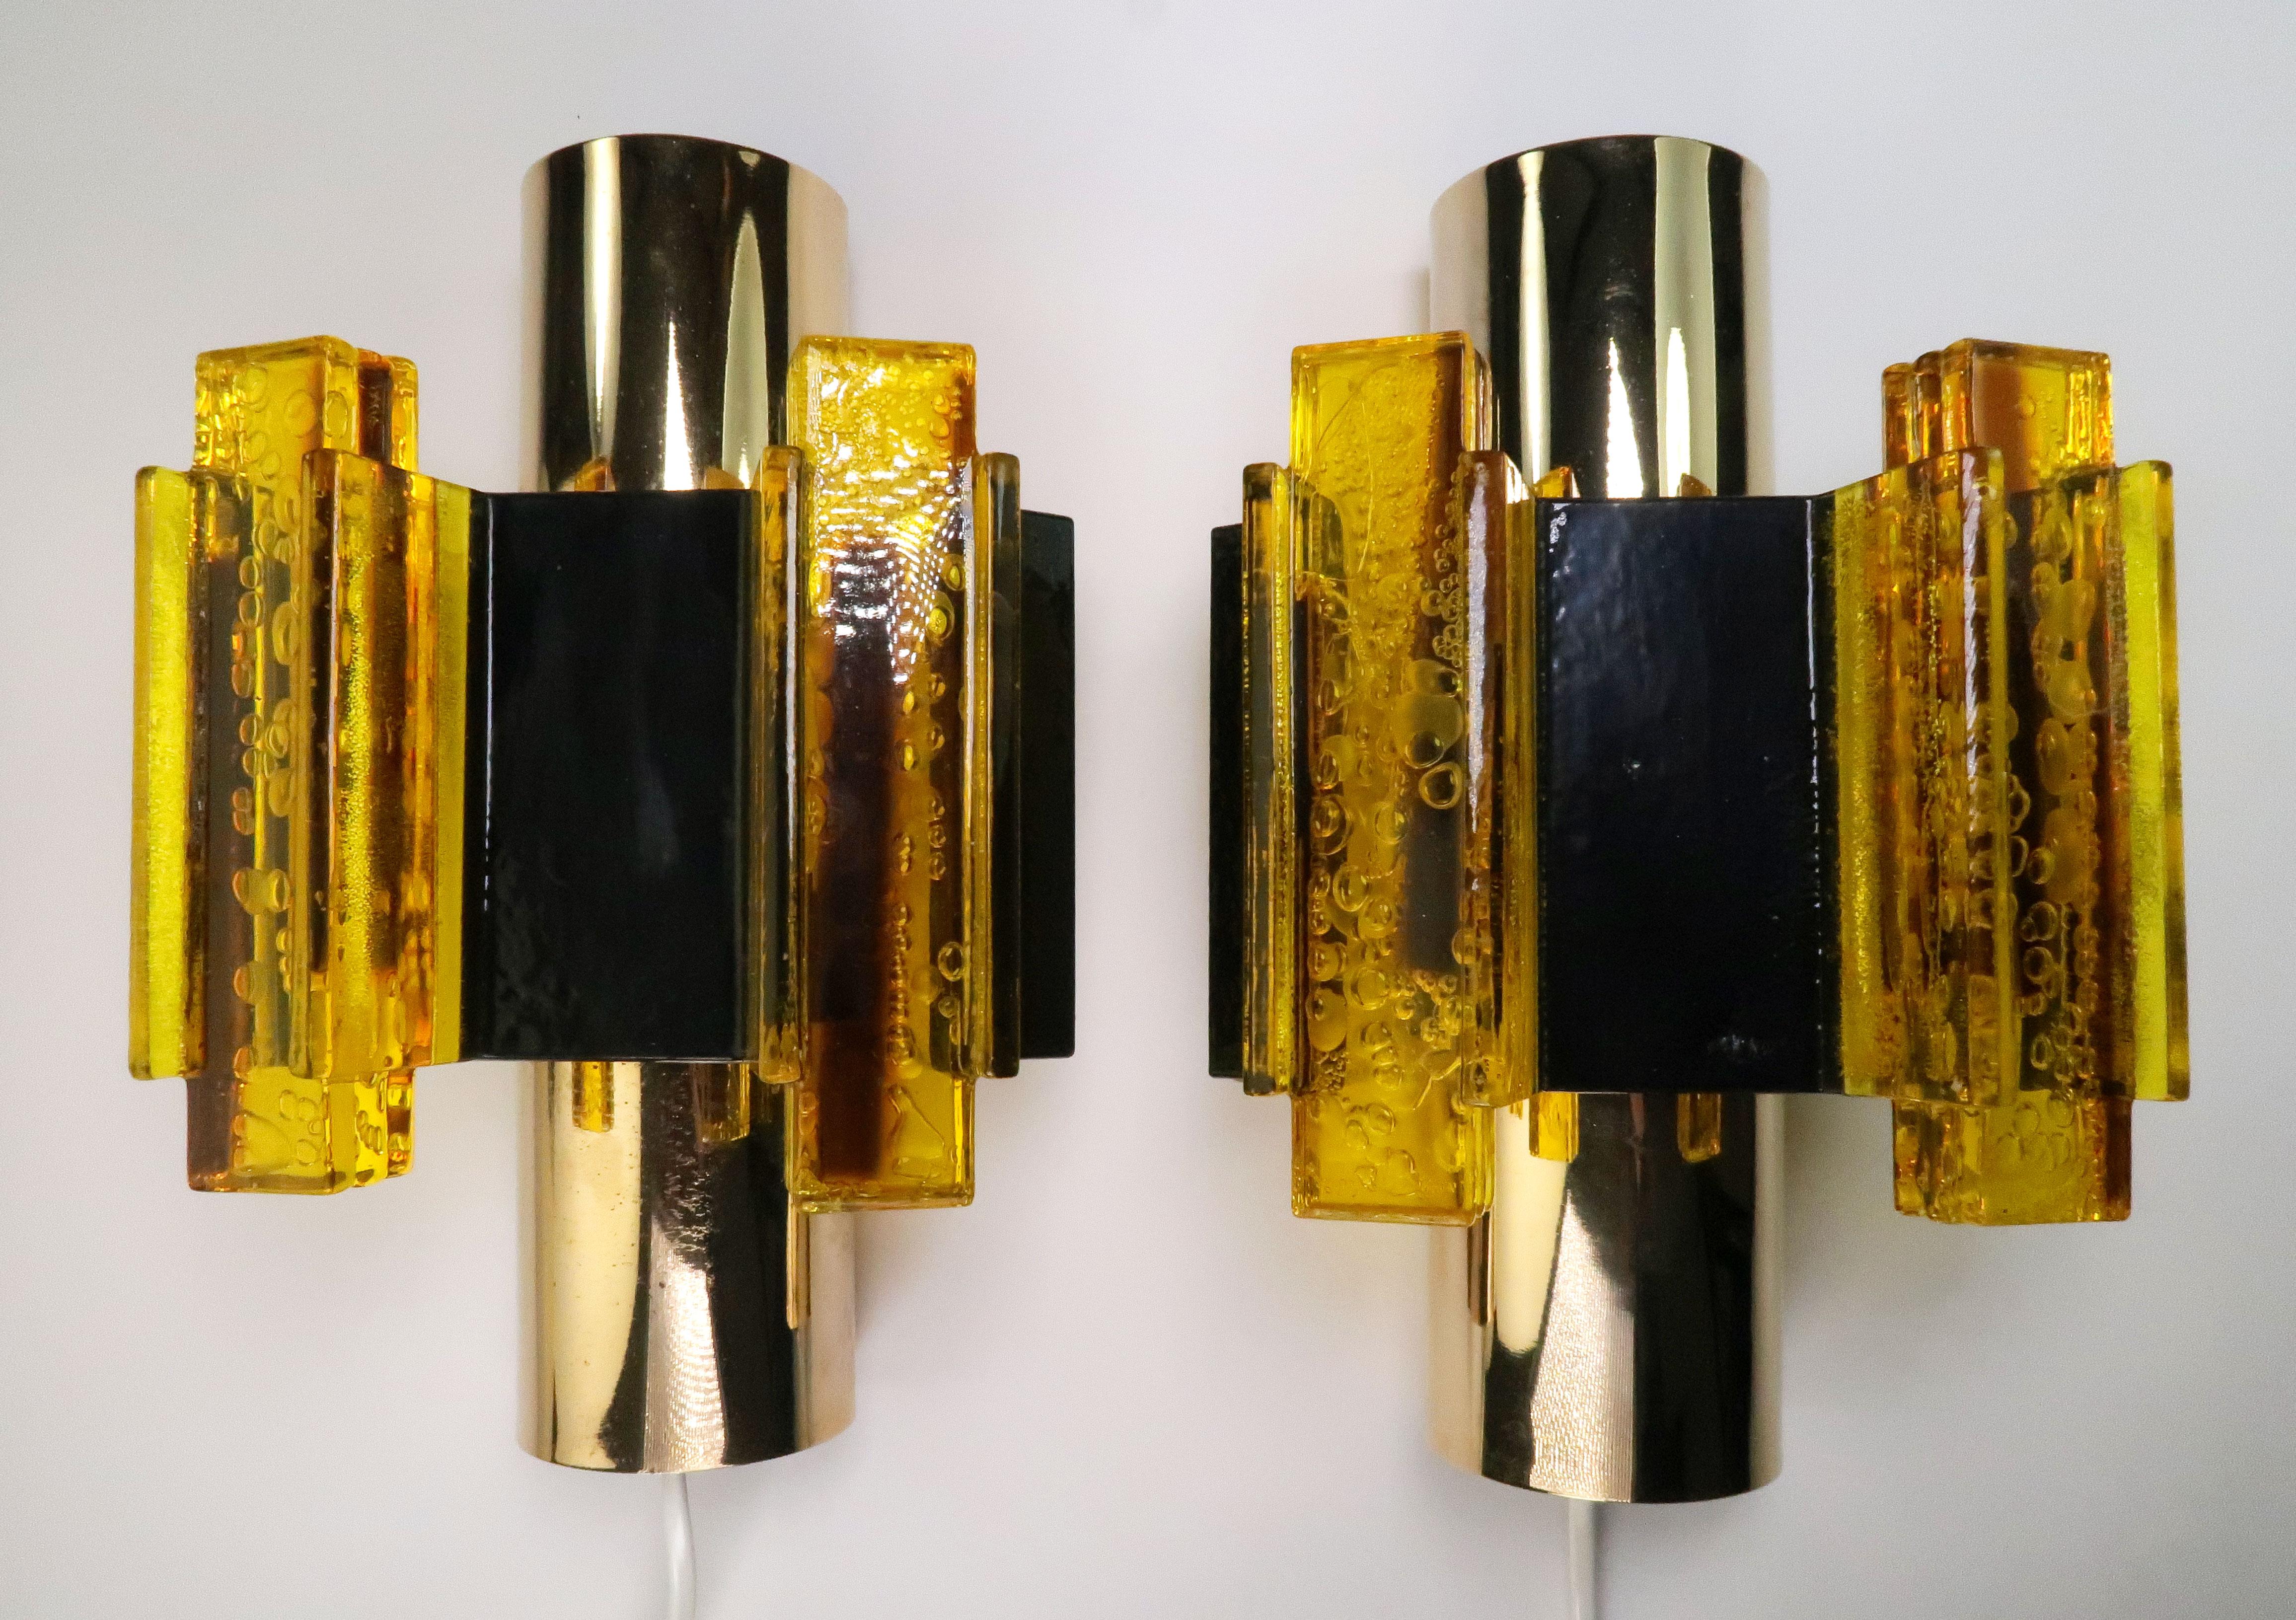 Set of two handmade Danish midcentury Space Age modernist wall lights by Danish designer and flight engineer, Claus Bolby. Manufactured by CeBo Industri in Jutland in the 1970s. Yellow rectangular acrylic resin sticks creating sculptural decoration